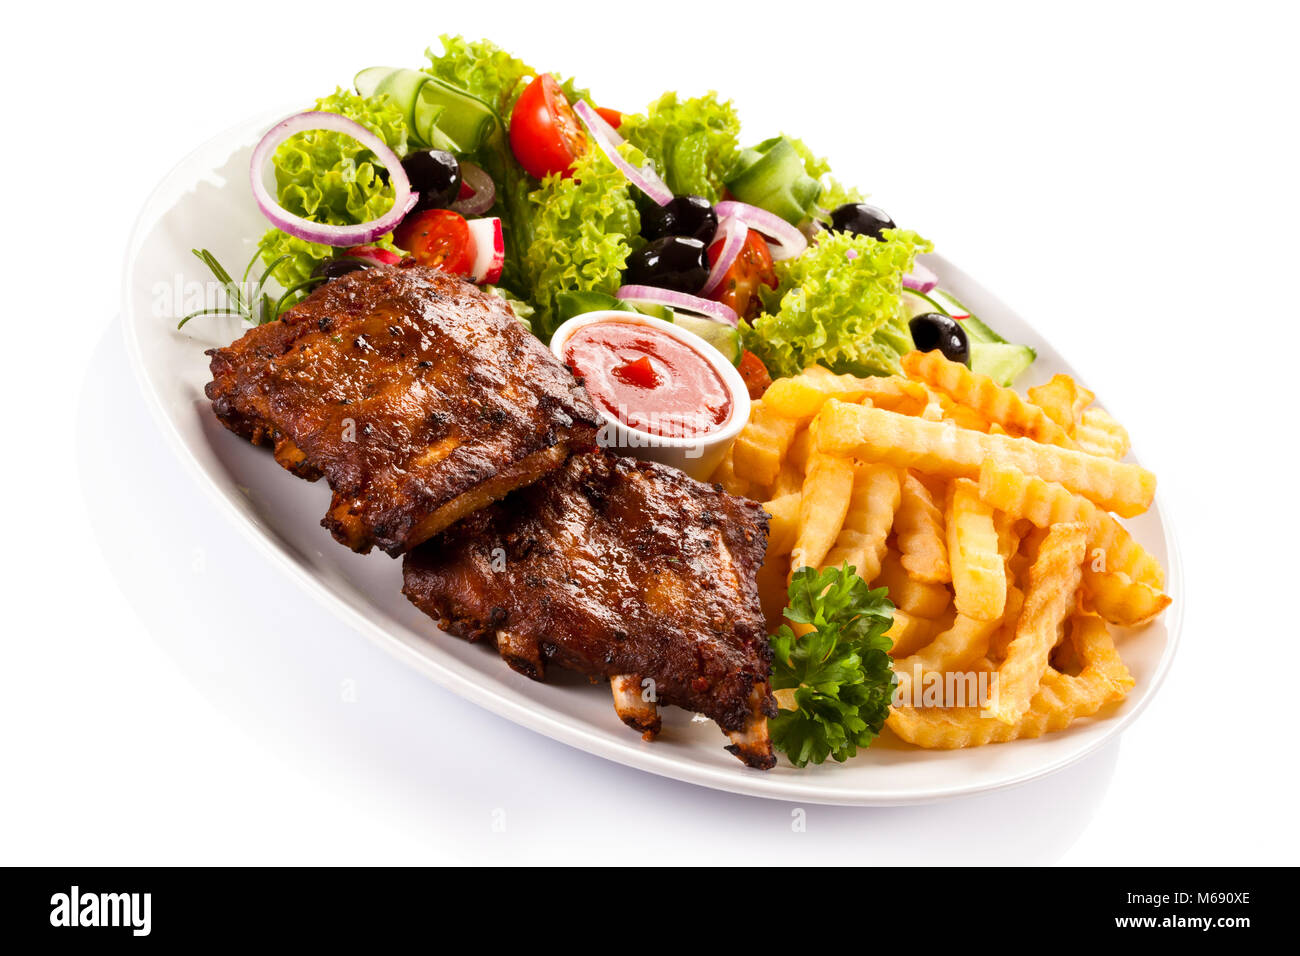 Grilled ribs, French fries and vegetables on white background Stock Photo